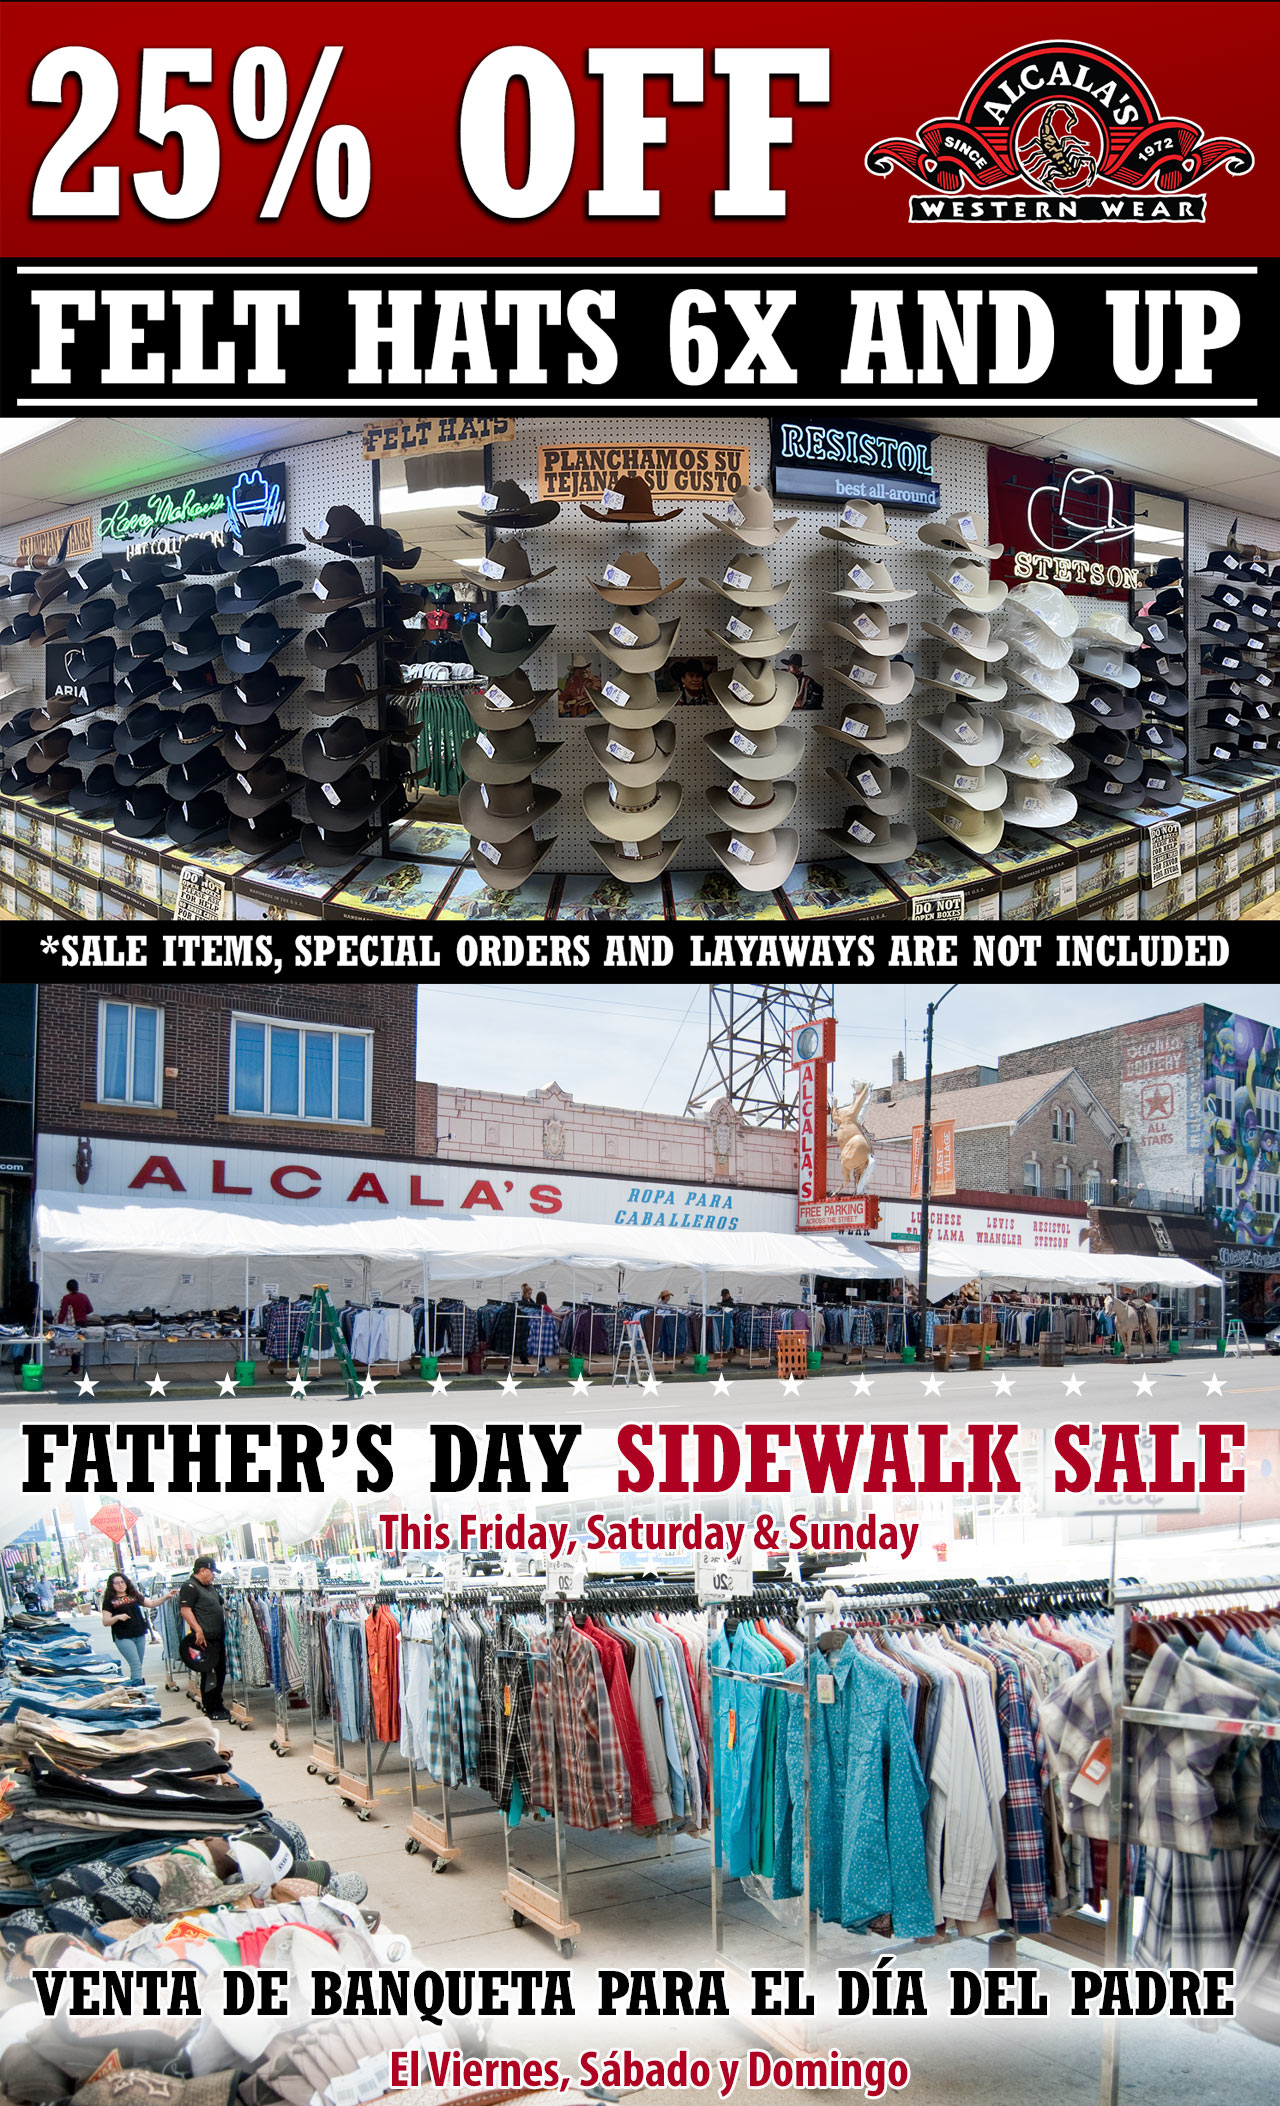 Father's Day Sidewalk Sale - Get 25% off any 6X or higher Felt Hat